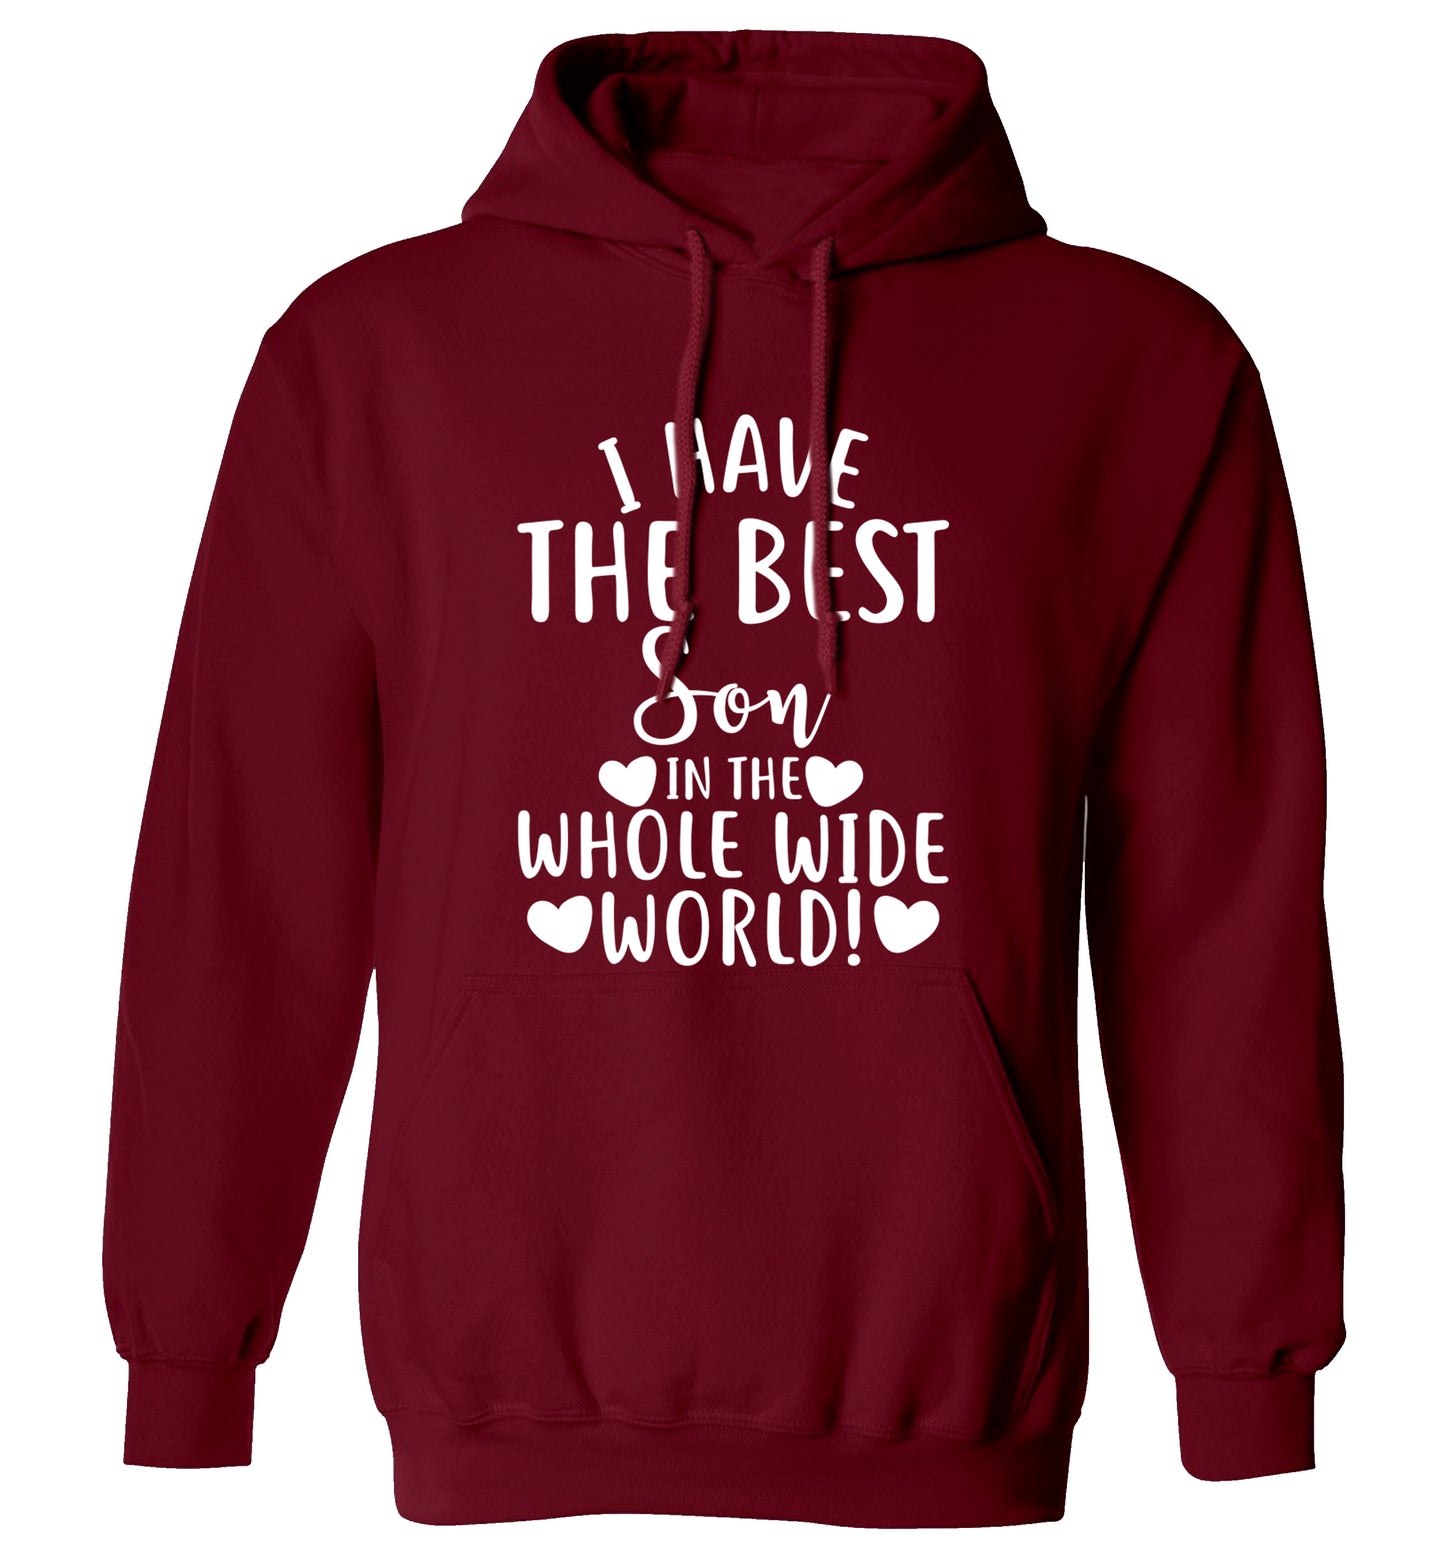 I have the best son in the whole wide world! adults unisex maroon hoodie 2XL